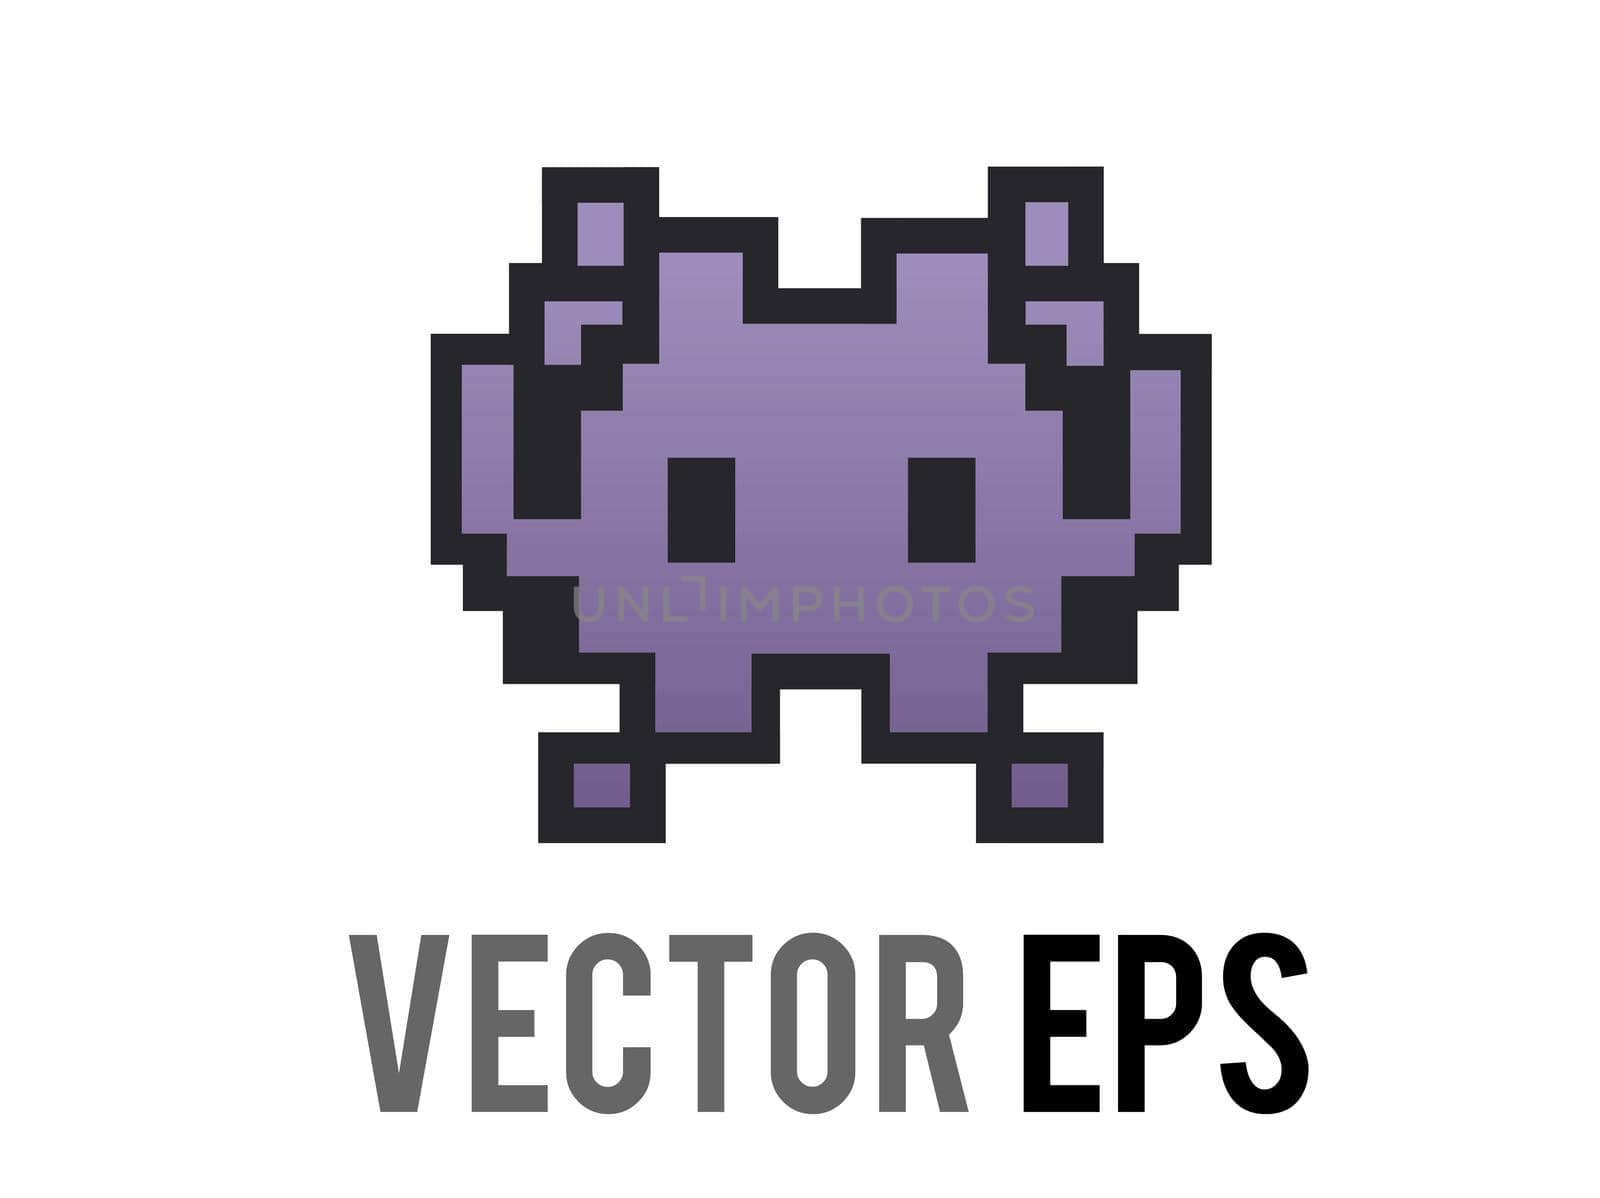 The isolated vector classic game gradient purple alien monster 8-bit graphic icon 